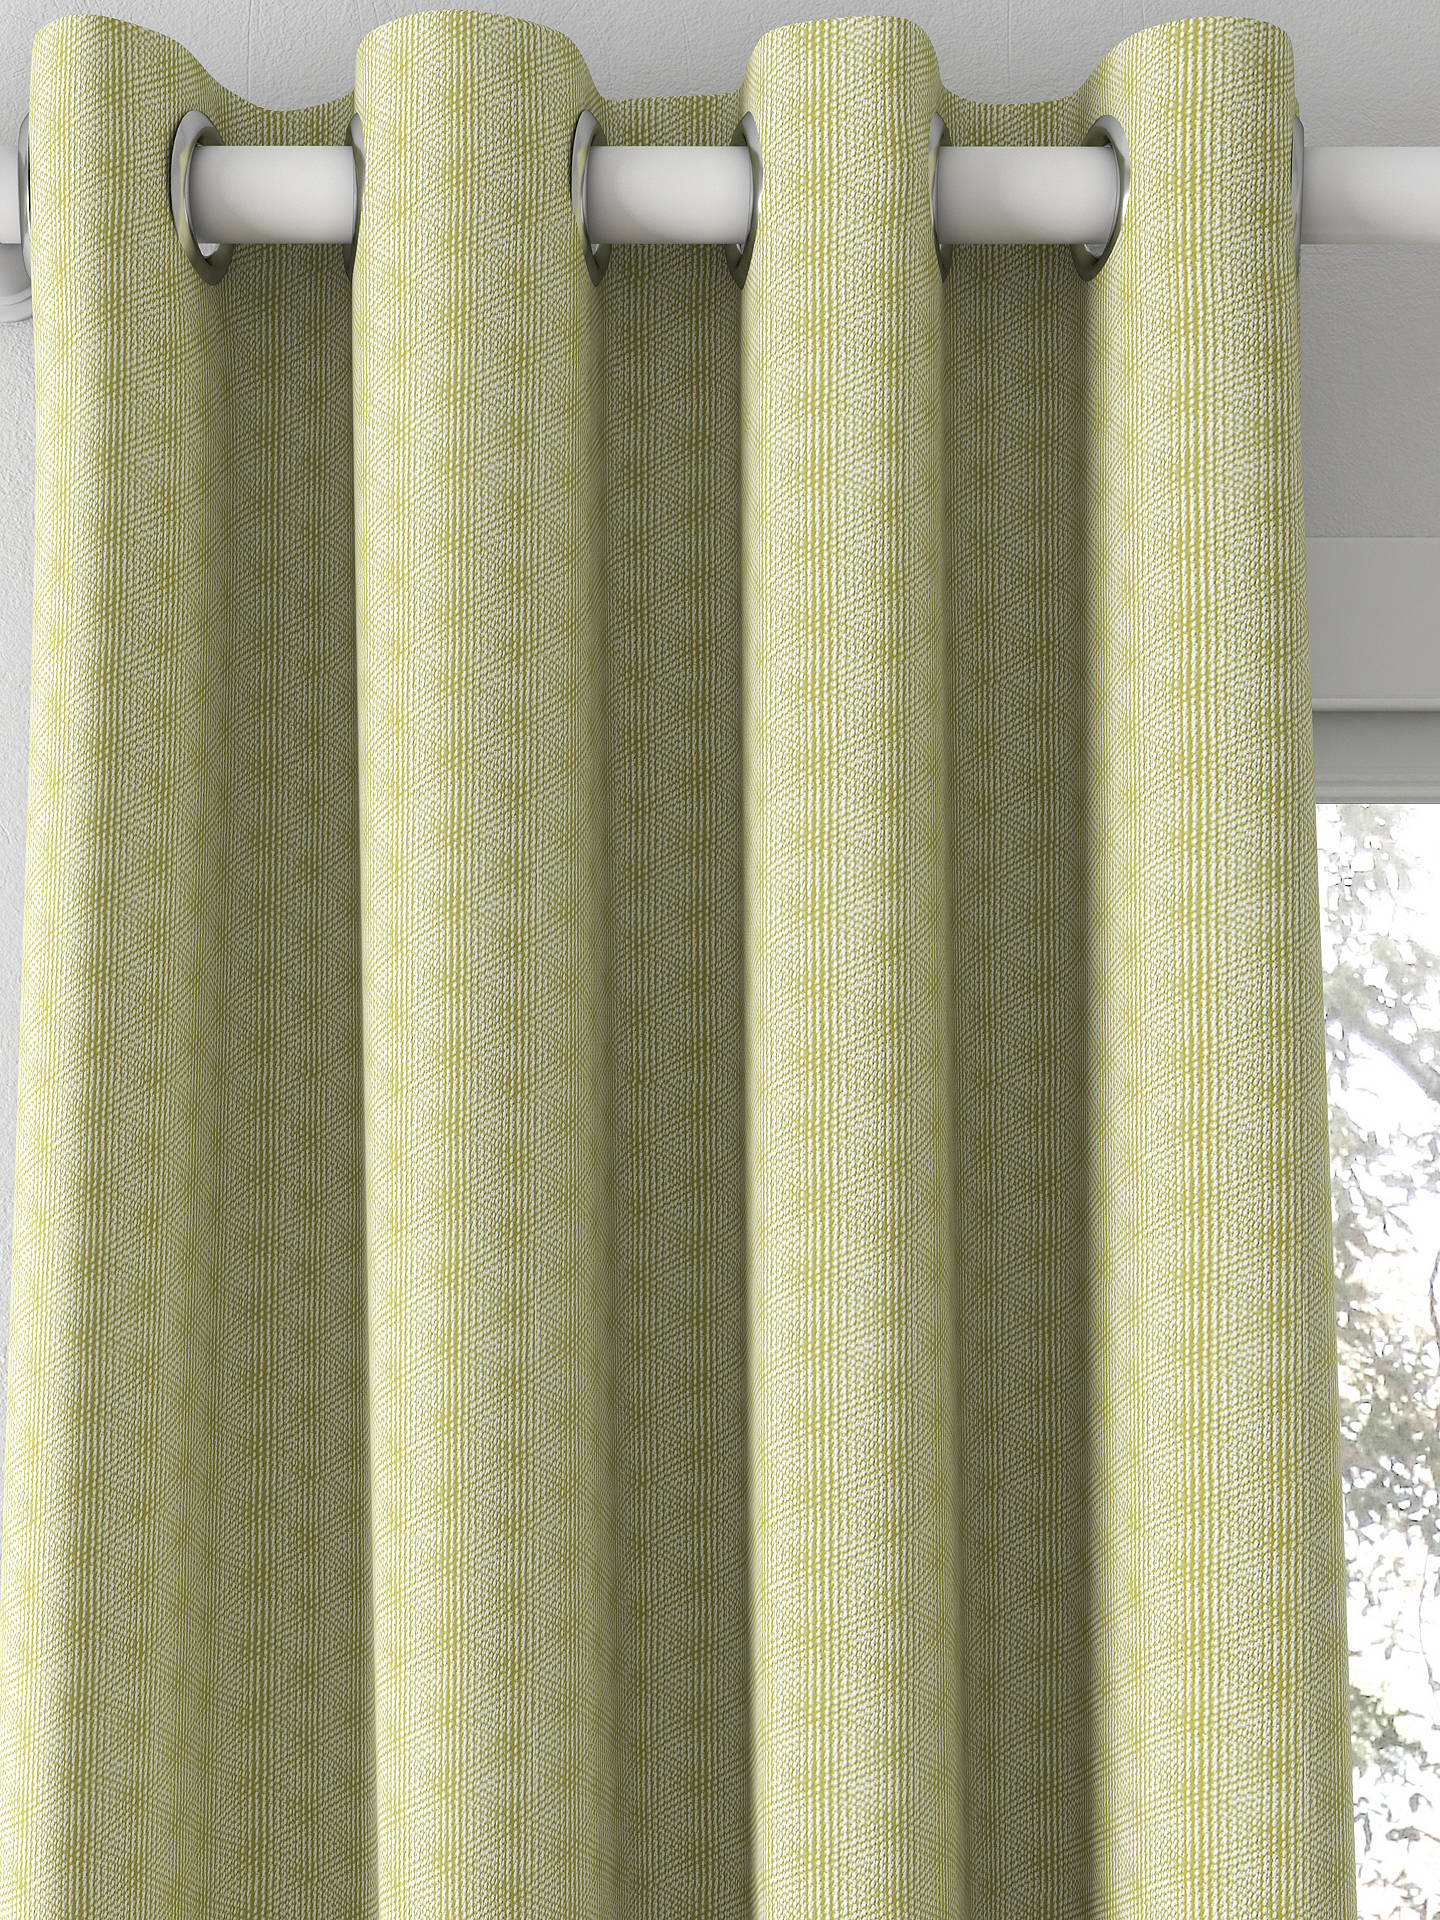 Prestigious Textiles Limitless Made to Measure Curtains, Willow